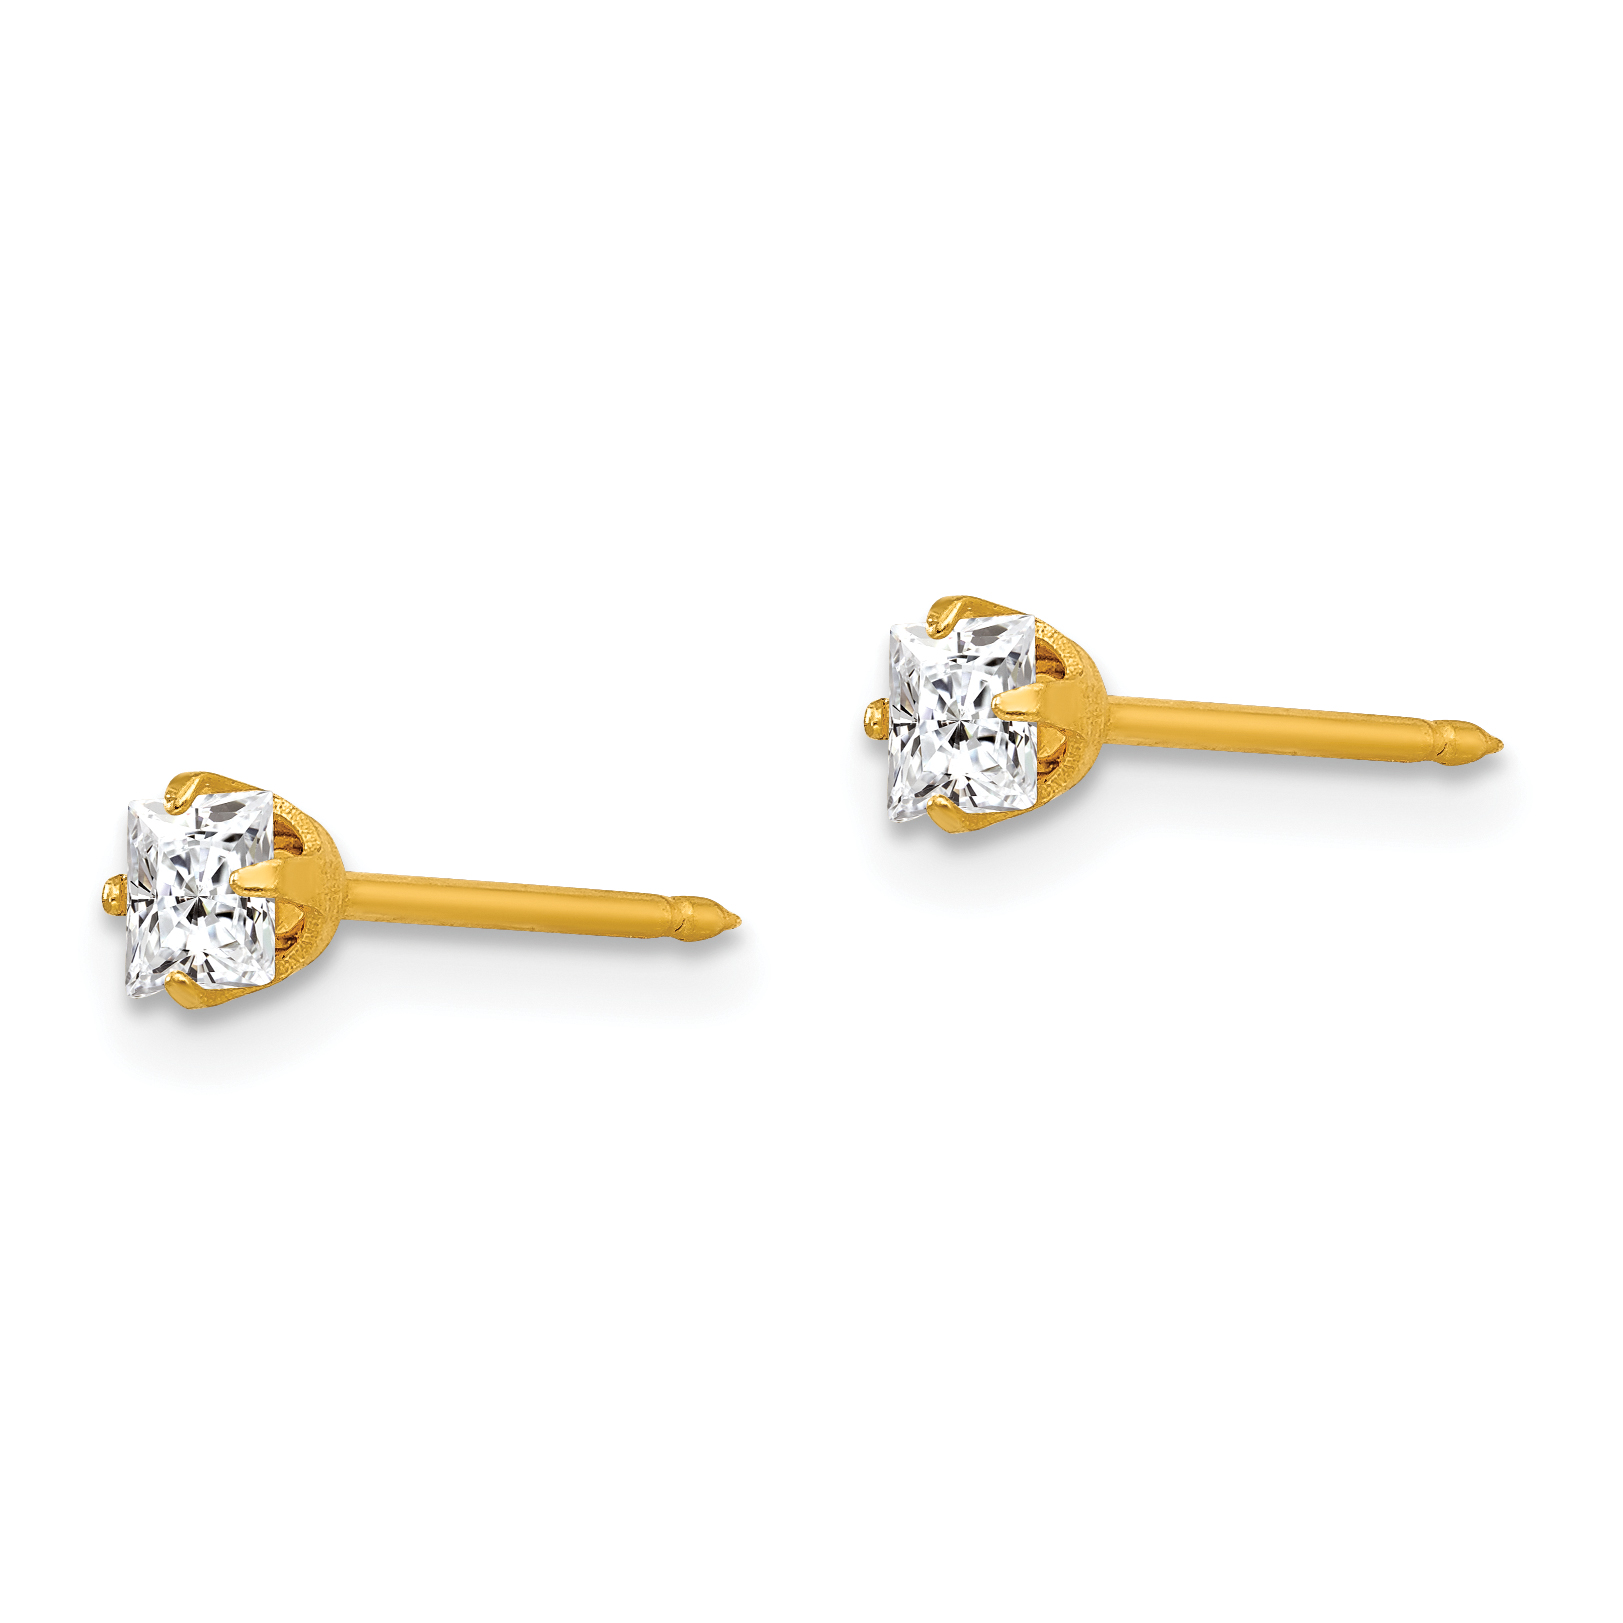 Details about   Children's Inverness 18K White-Plated 3 MM Square CZ Stud Earrings MSRP $179 